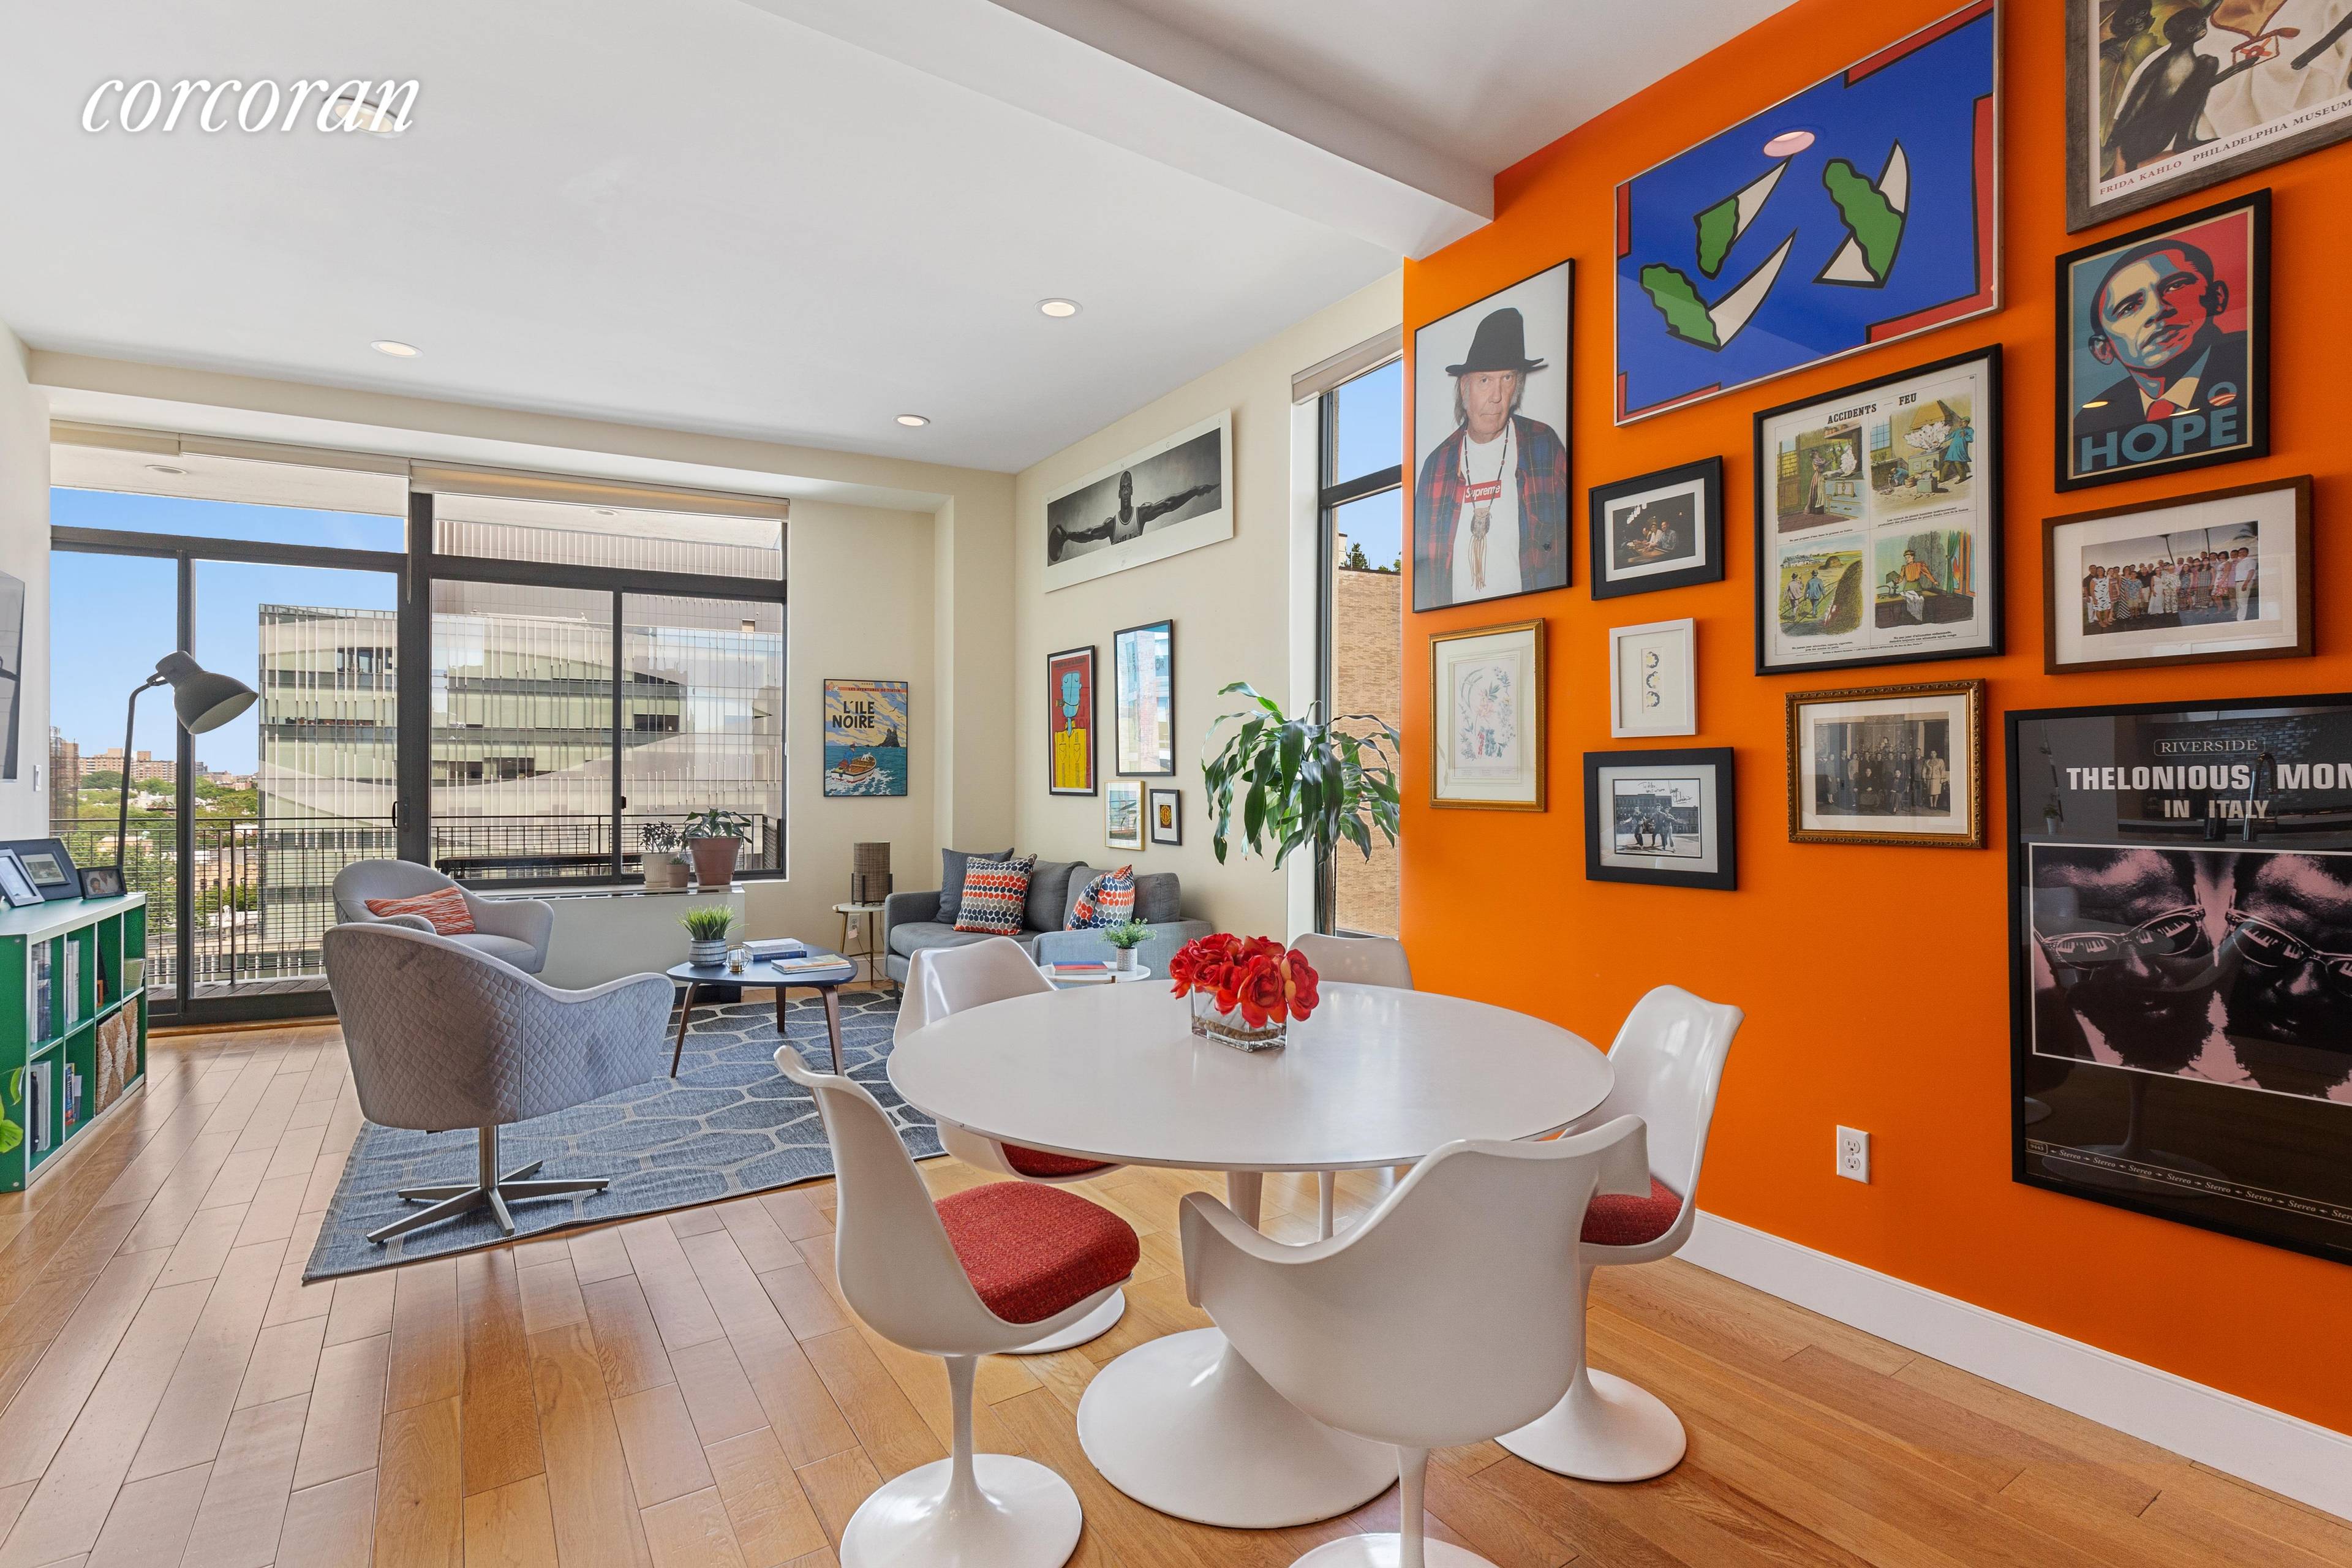 Perched high above the crossroads of Fort Greene, Boerum Hill, Downtown Brooklyn and Park Slope, this spacious, modern two bedroom, two bath condo leaves nothing to be desired.